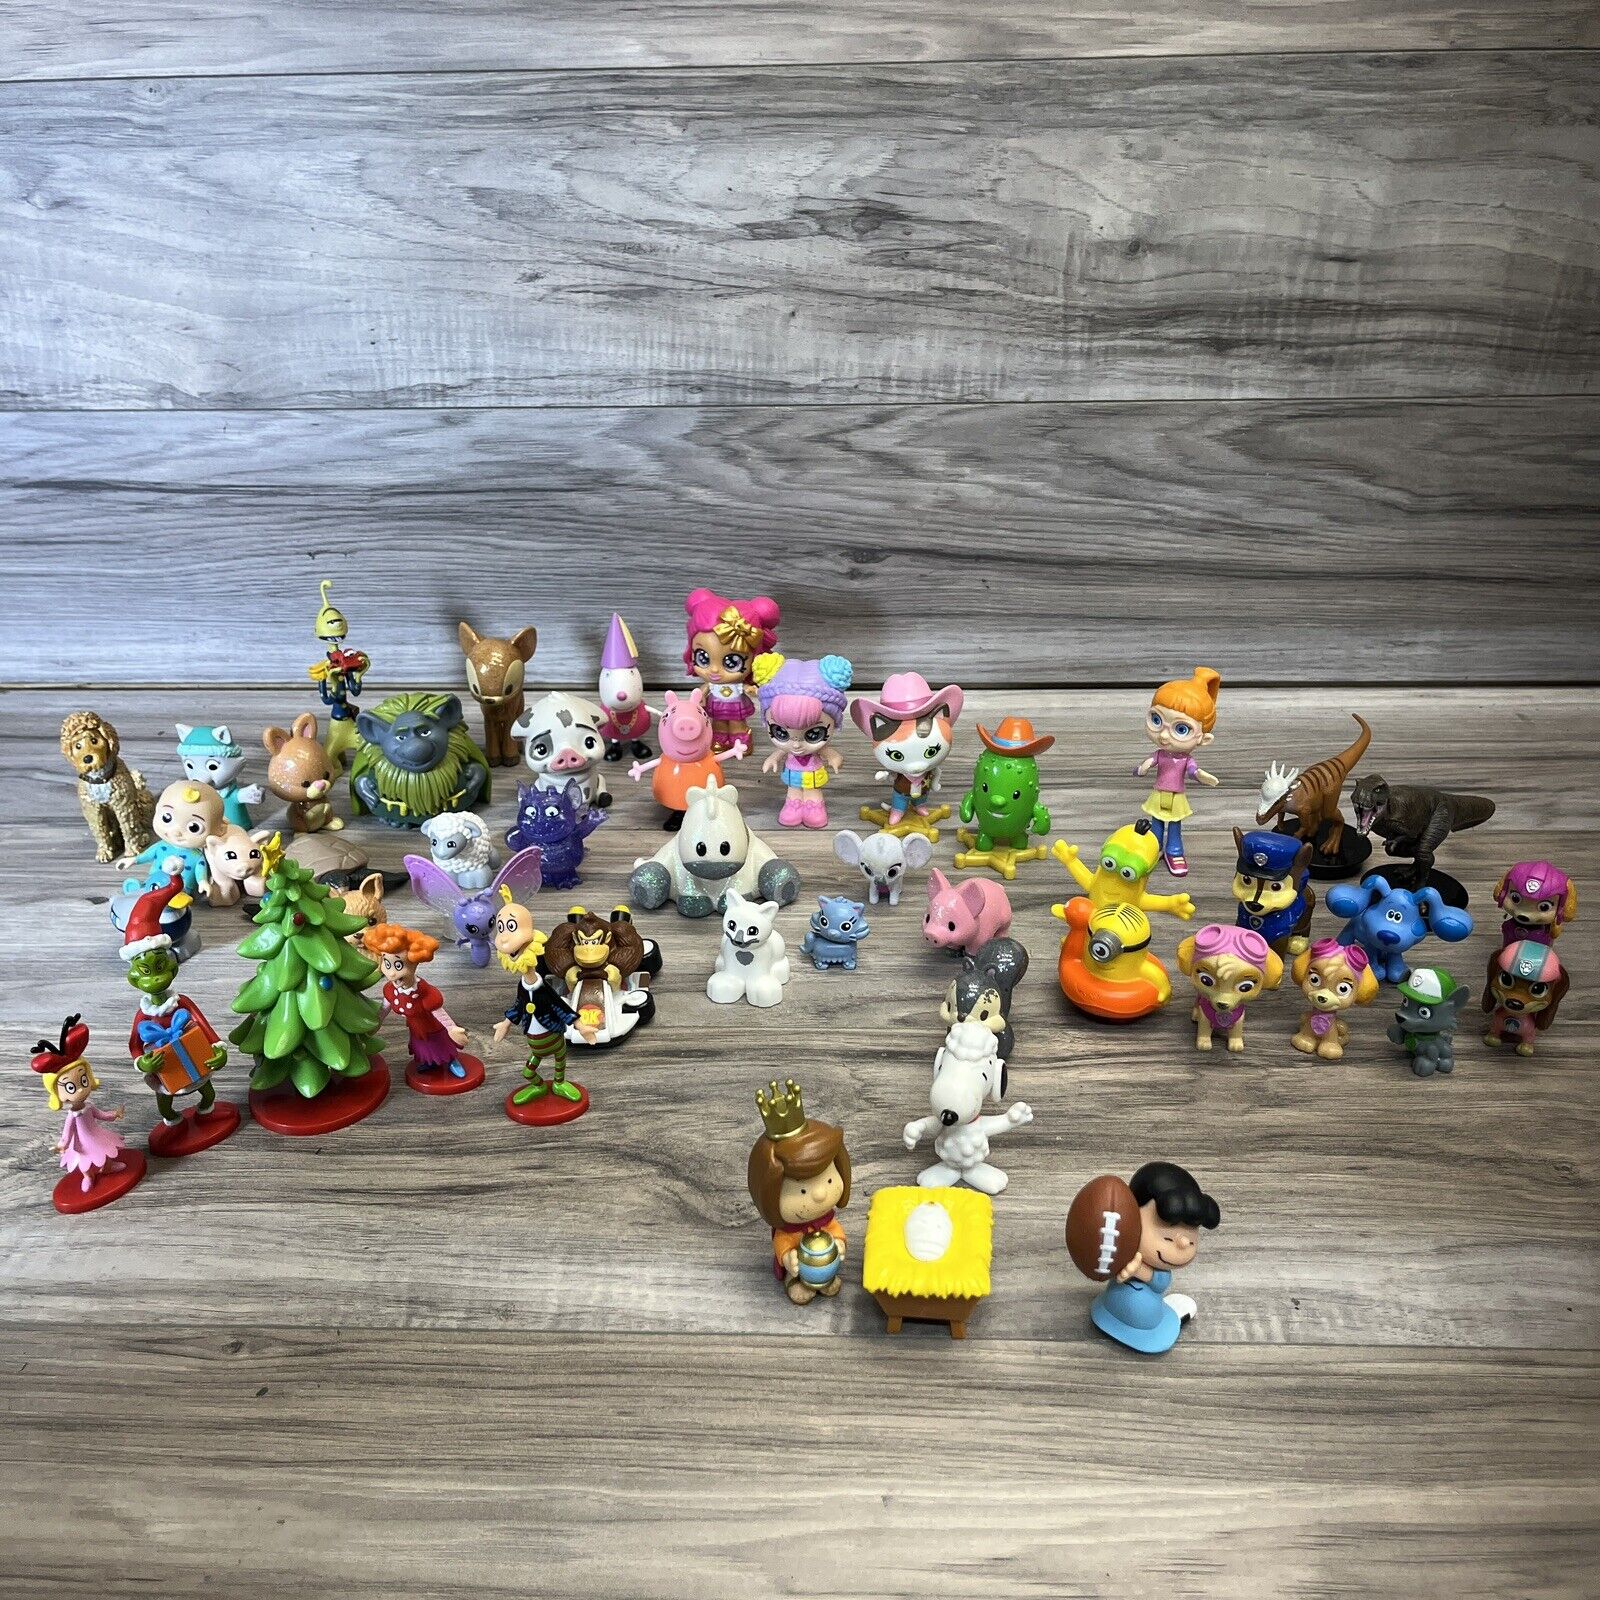 Large Lot Of 50+ Figurines & Small Toys The Grinch, Peanuts, Minions, Paw Patrol